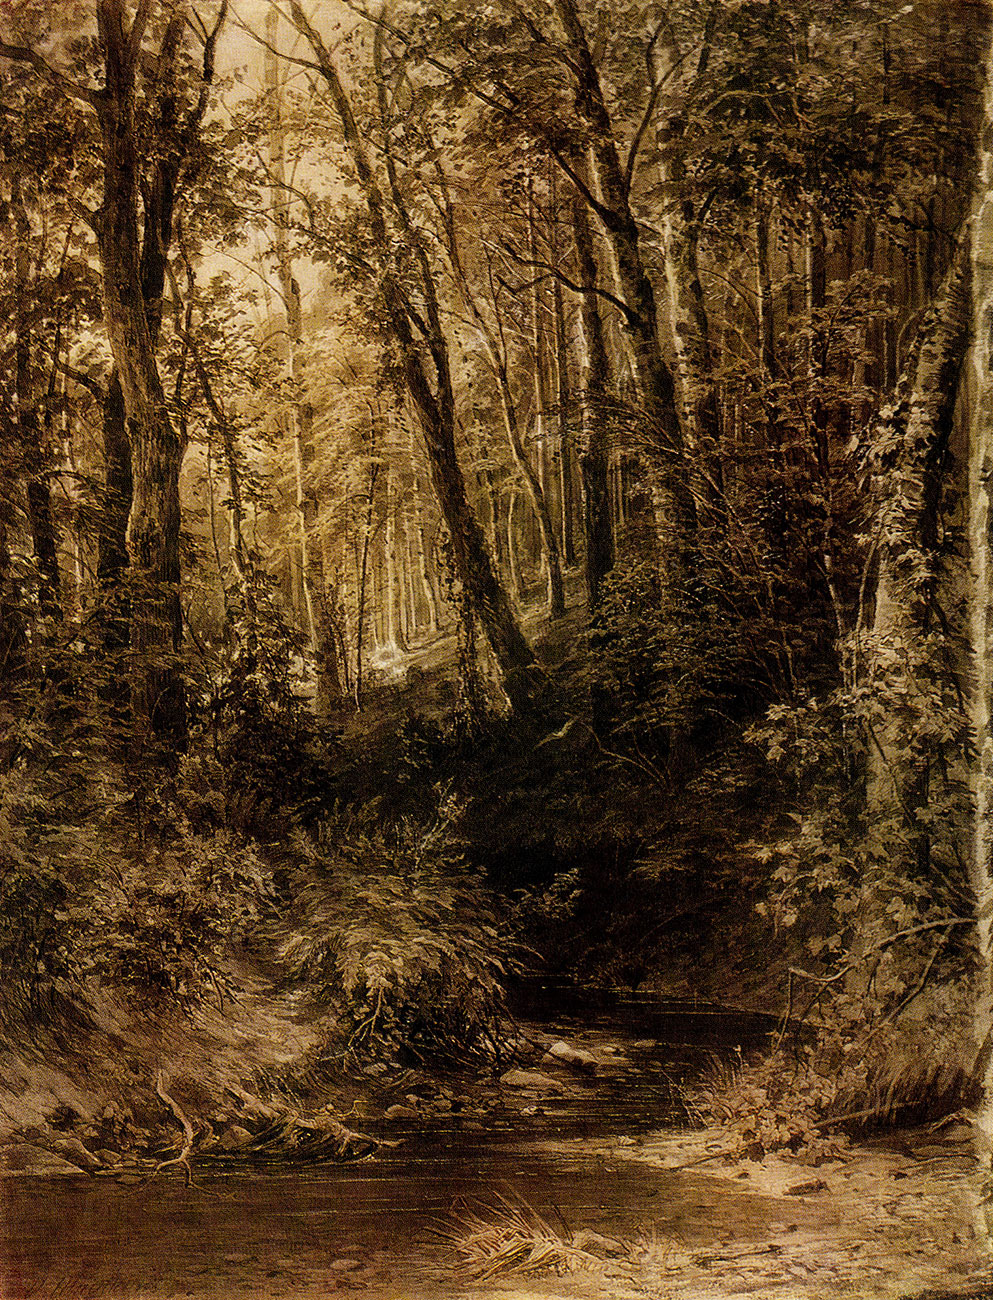 128. Forest stream. 1880s. Sepia, pen and ink with scratching on paper. 66.6X52 cm. The Russian Museum, Leningrad